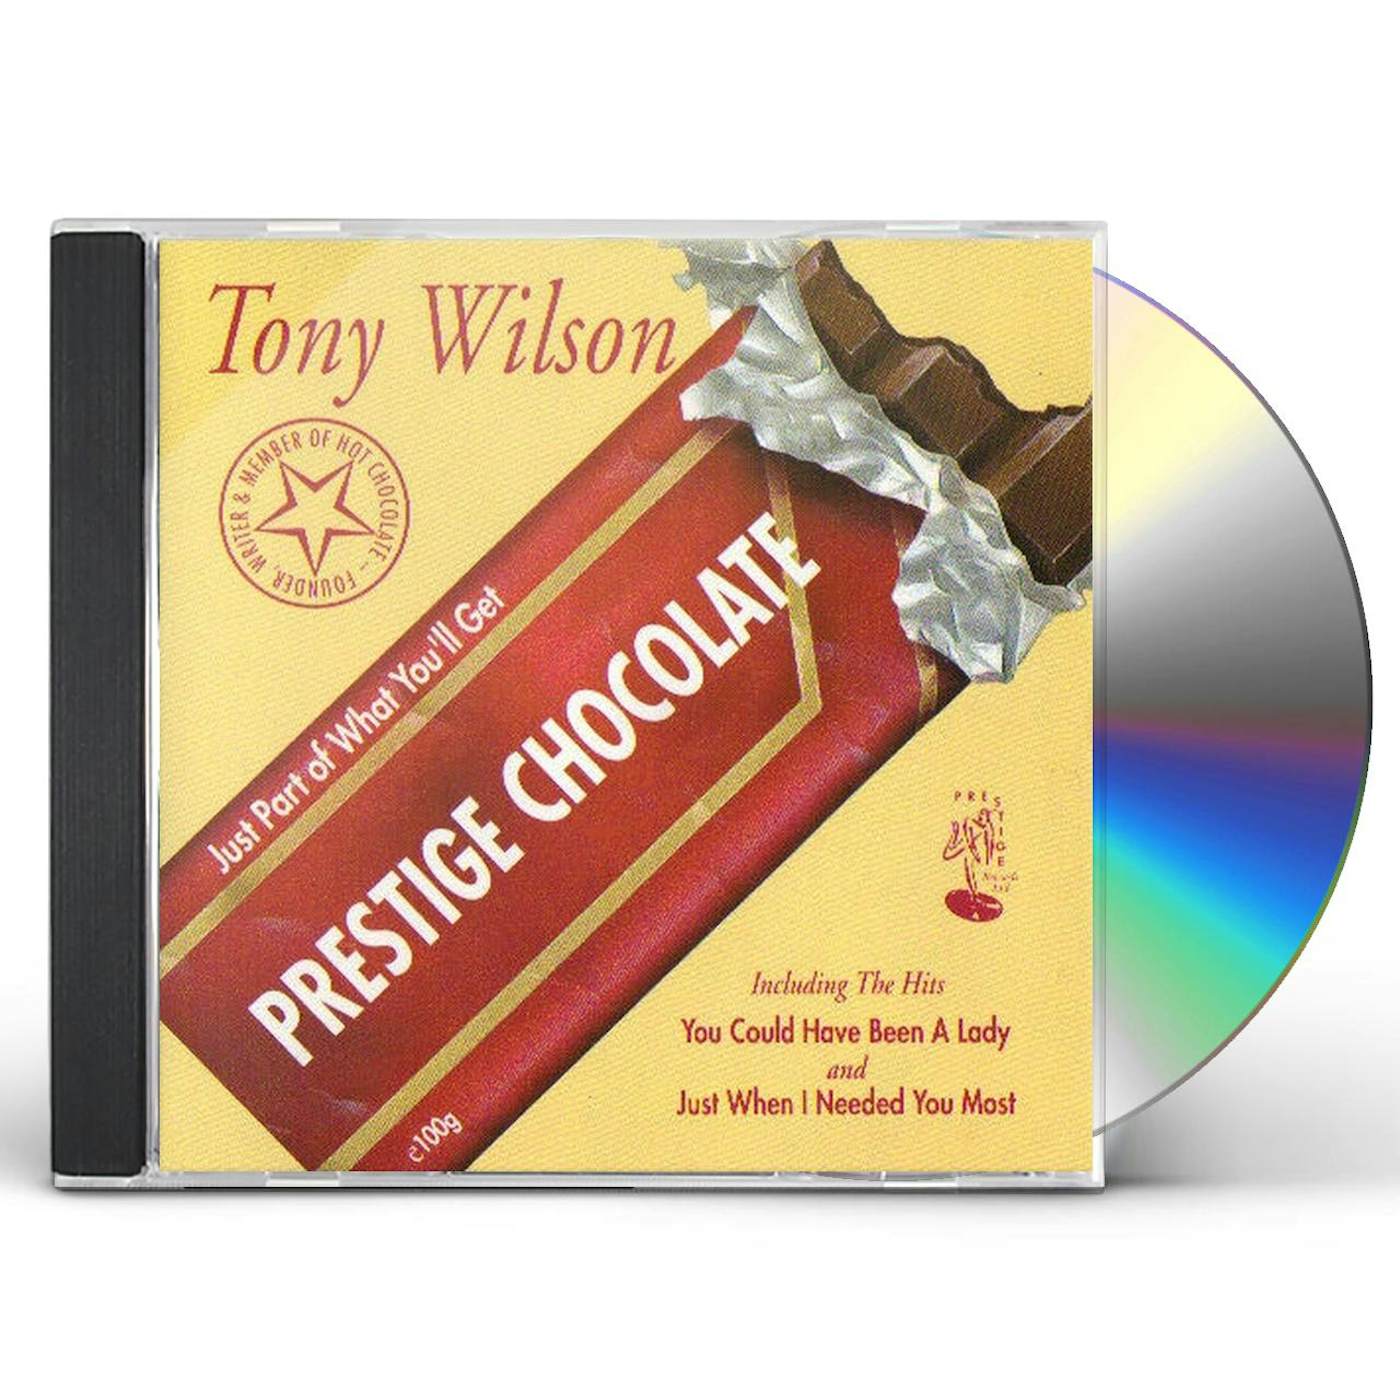 Tony Wilson JUST PART OF WHAT YOULL GET CD